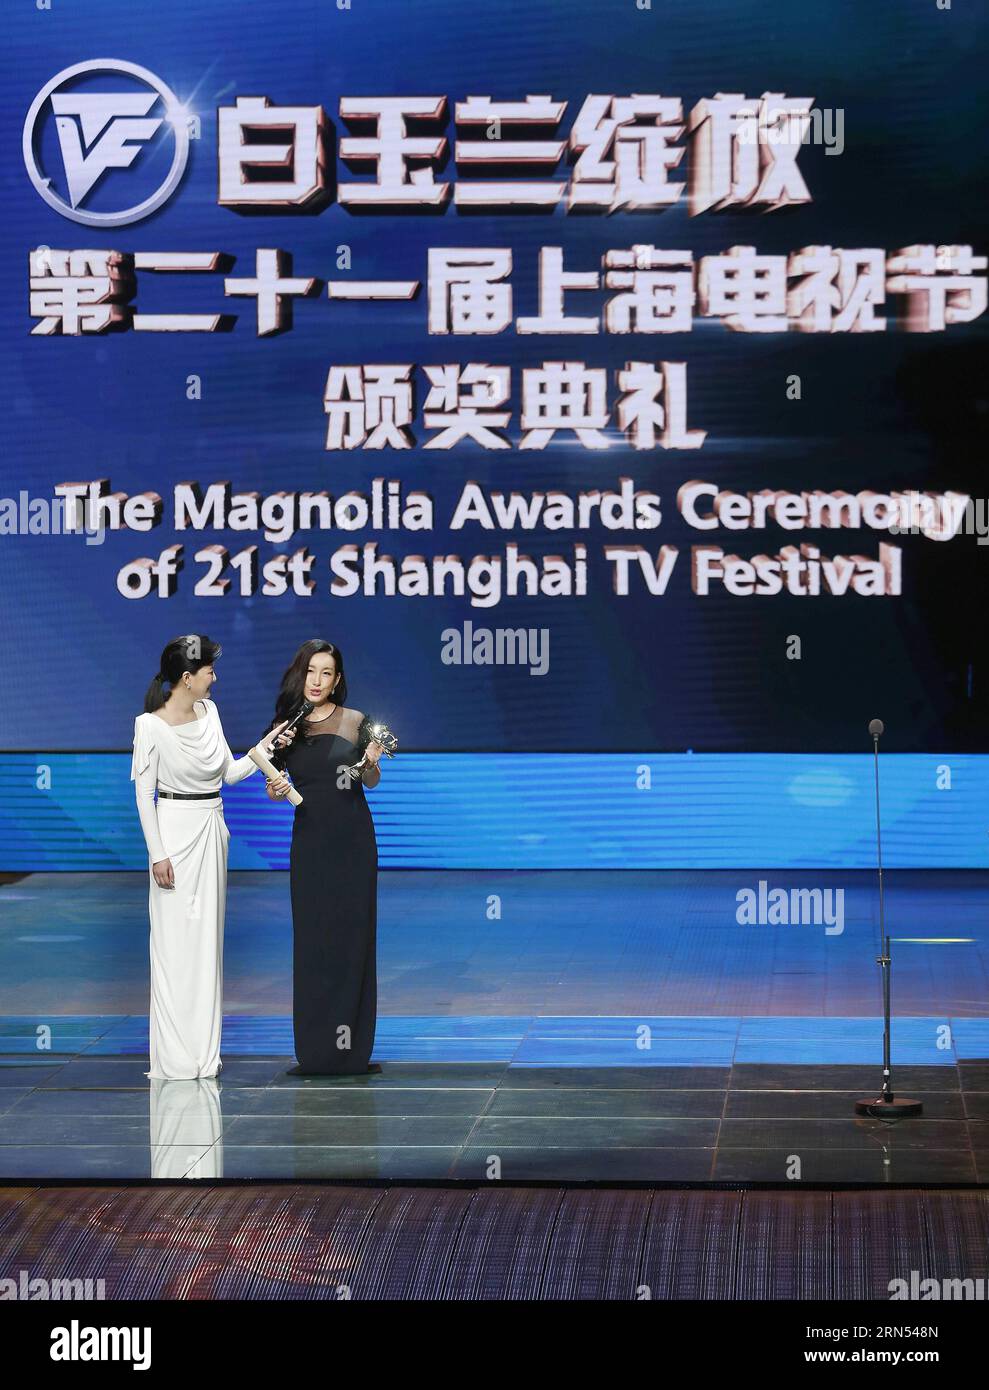 (150612) -- BEIJING, June. 12, 2015 -- Actress Qin Hailu (R) wins the the Best Supporting Actress award during the 21st Shanghai Television Festival in east China s Shanghai Municipality, June 12, 2012. The 21st Shanghai Television Festival closed in Shanghai Friday. ) (yxb) CHINA-SHANGHAI-TV FESTIVAL-CLOSING CEREMONY (CN) DingxTing PUBLICATIONxNOTxINxCHN   150612 Beijing June 12 2015 actress Qin Hailu r Wins The The Best Supporting actress Award during The 21st Shanghai Television Festival in East China S Shanghai Municipality June 12 2012 The 21st Shanghai Television Festival Closed in Shang Stock Photo